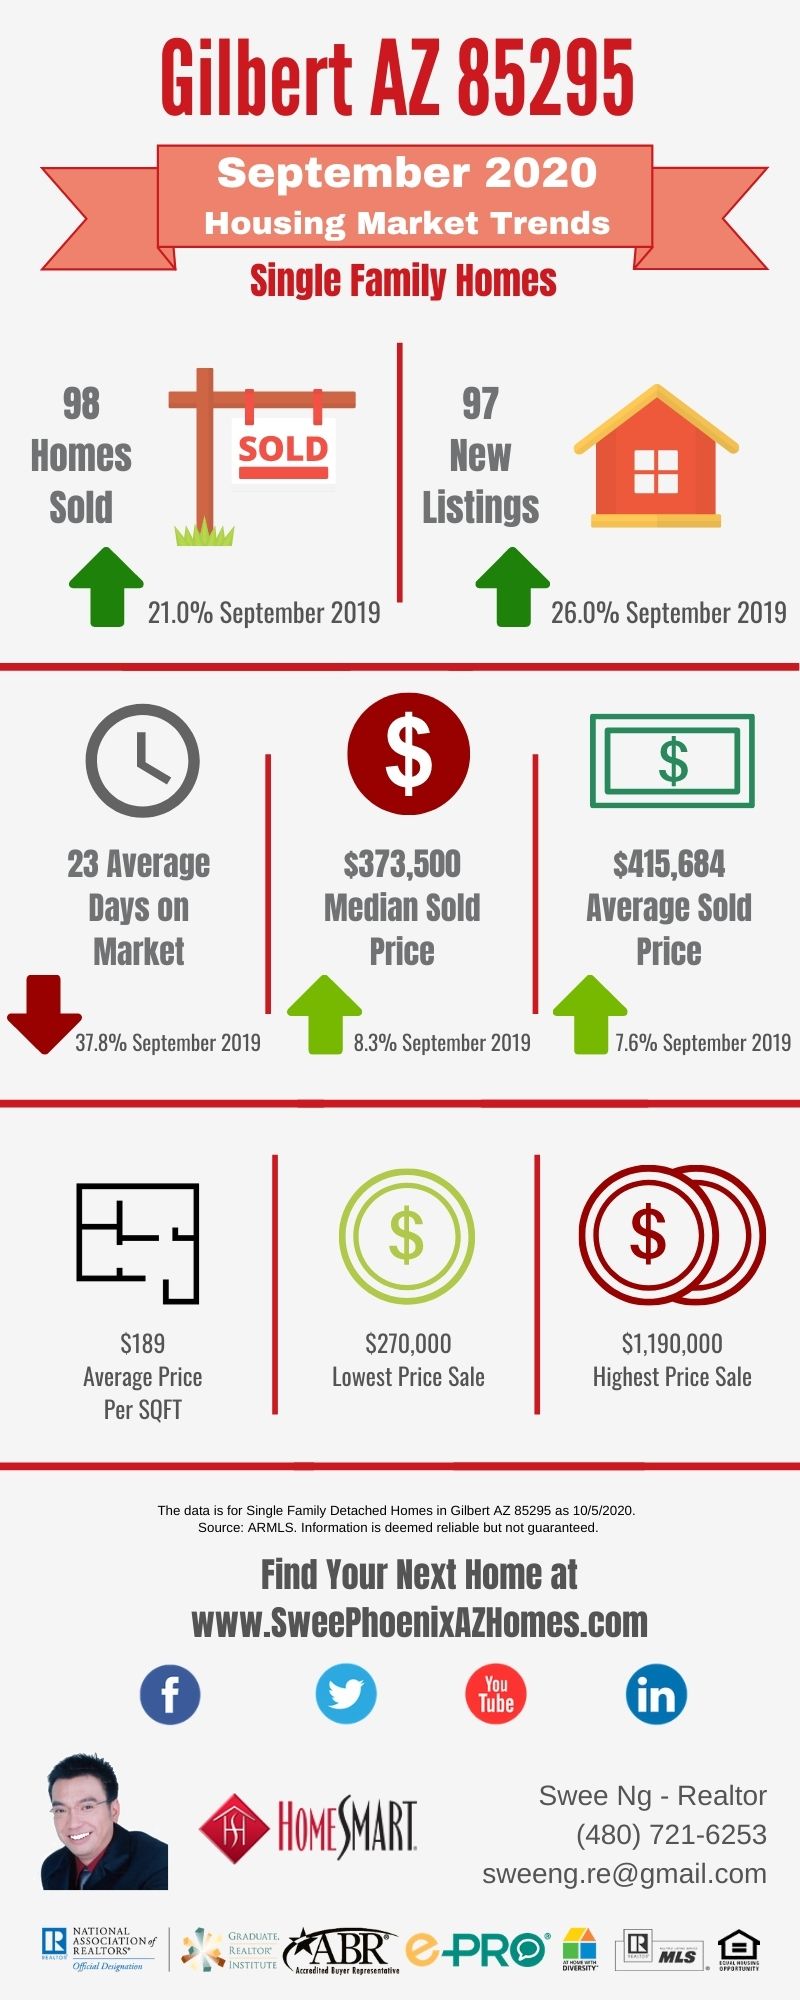 Gilbert AZ 85295 Housing Market Trends Report September 2020 by Swee Ng, Real Estate and House Value